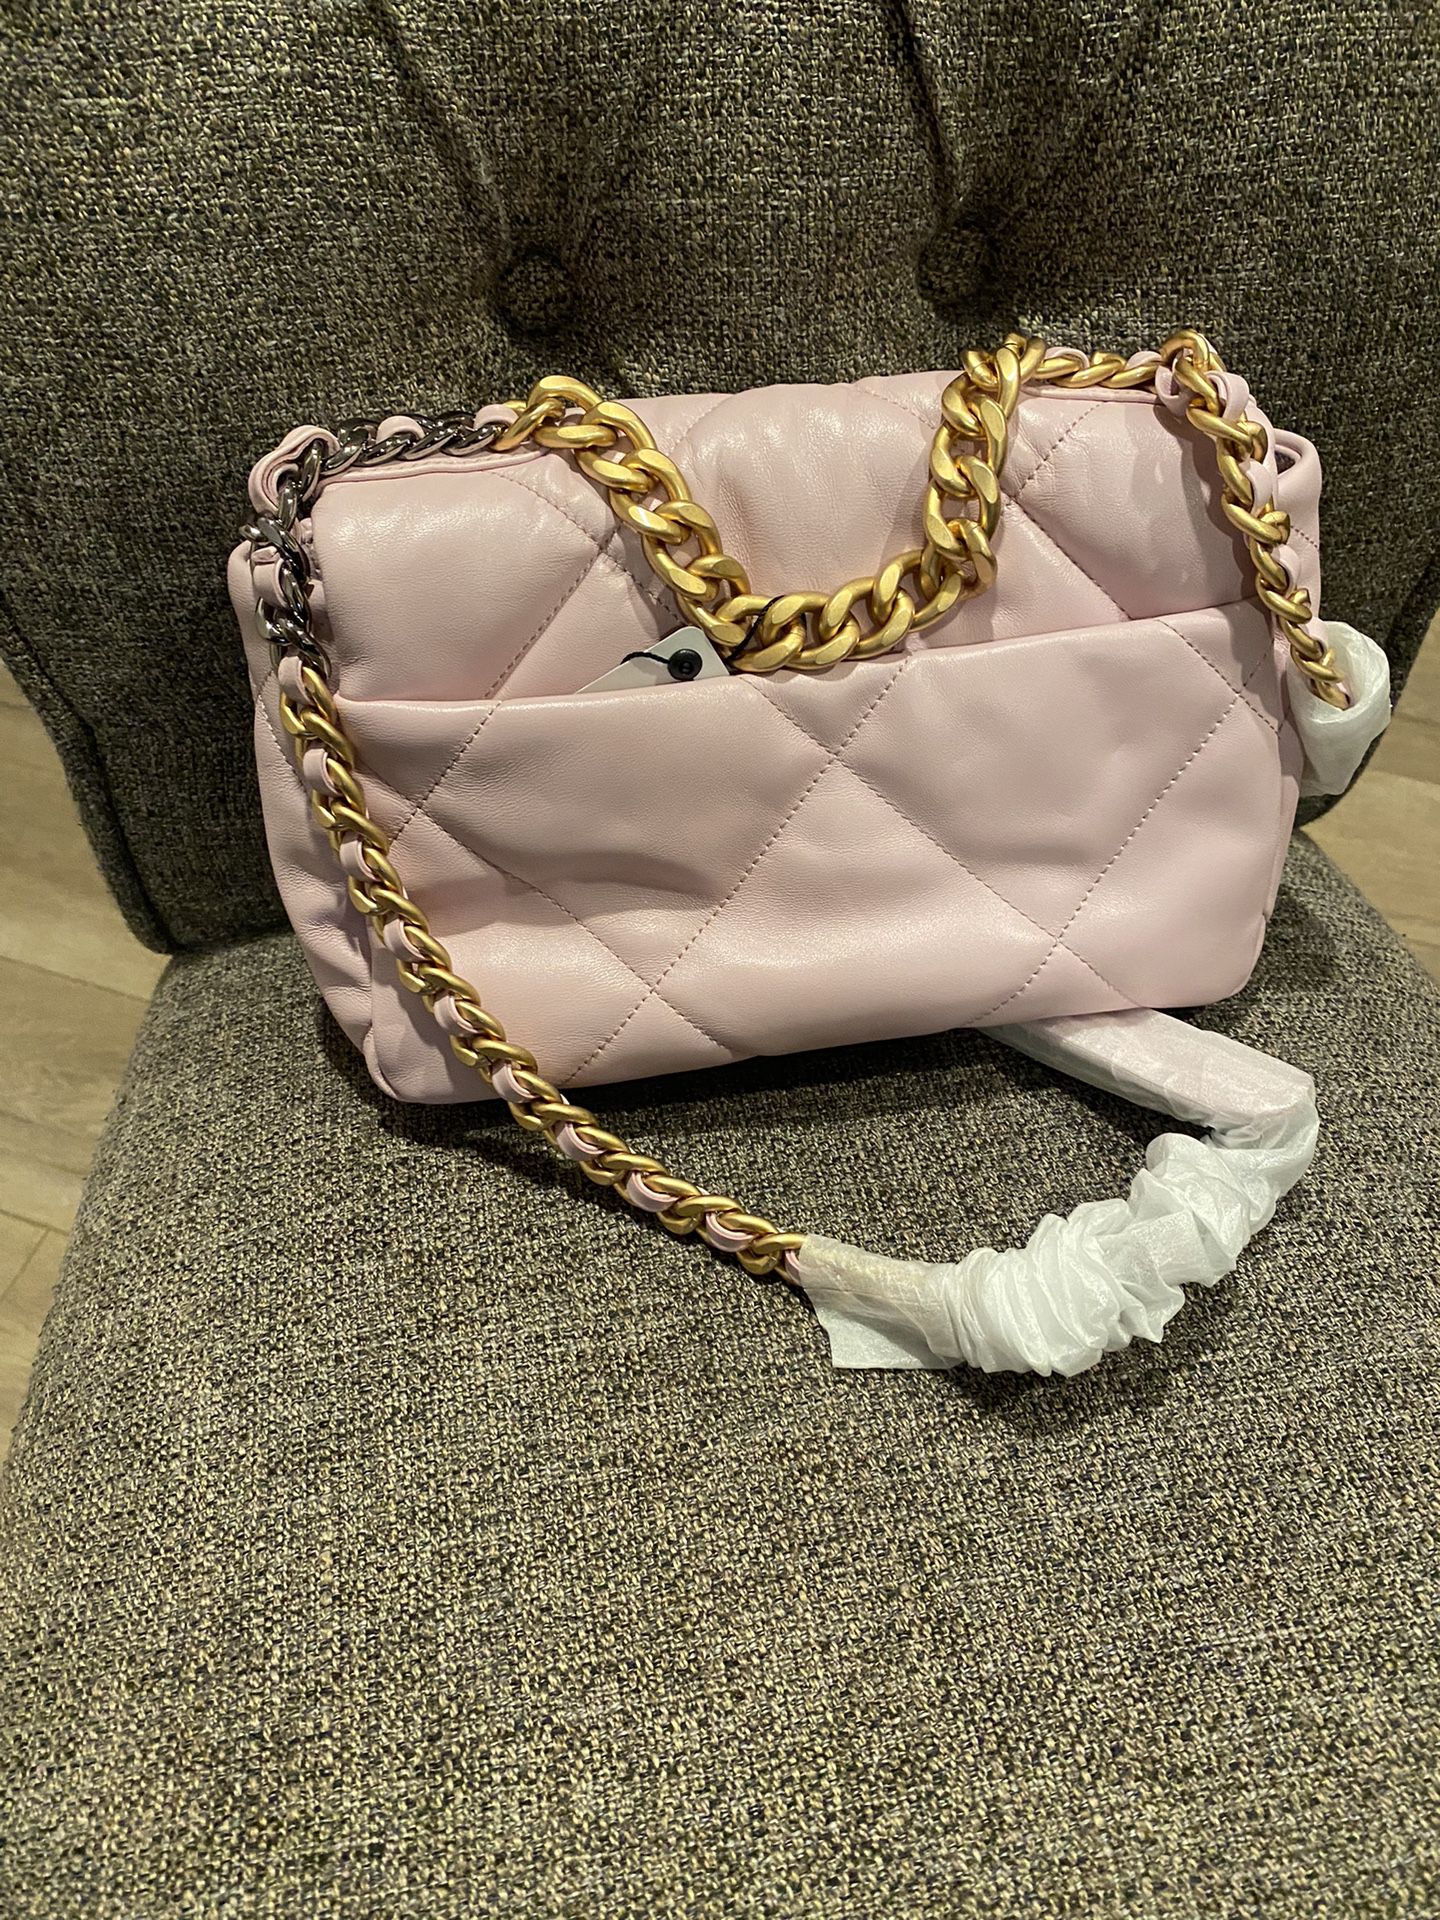 Chanel Bag for Sale in Los Angeles, CA - OfferUp